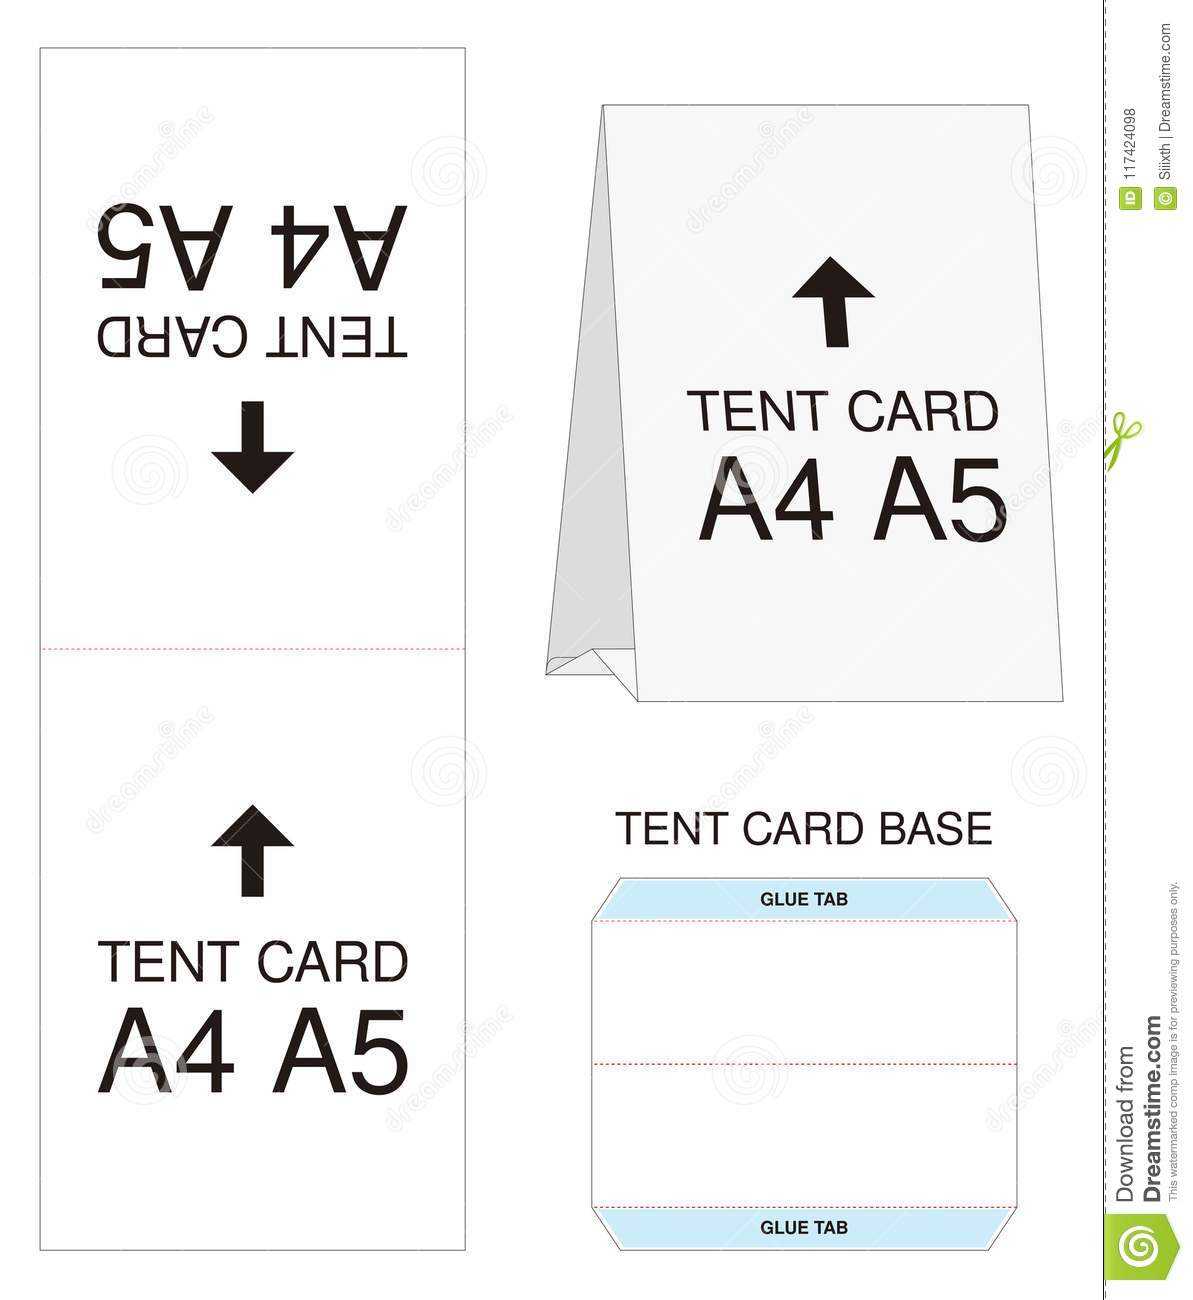 Tent Card A4 A5 Size Mock Up Die Cut Stock Vector Intended For Free Tent Card Template Downloads